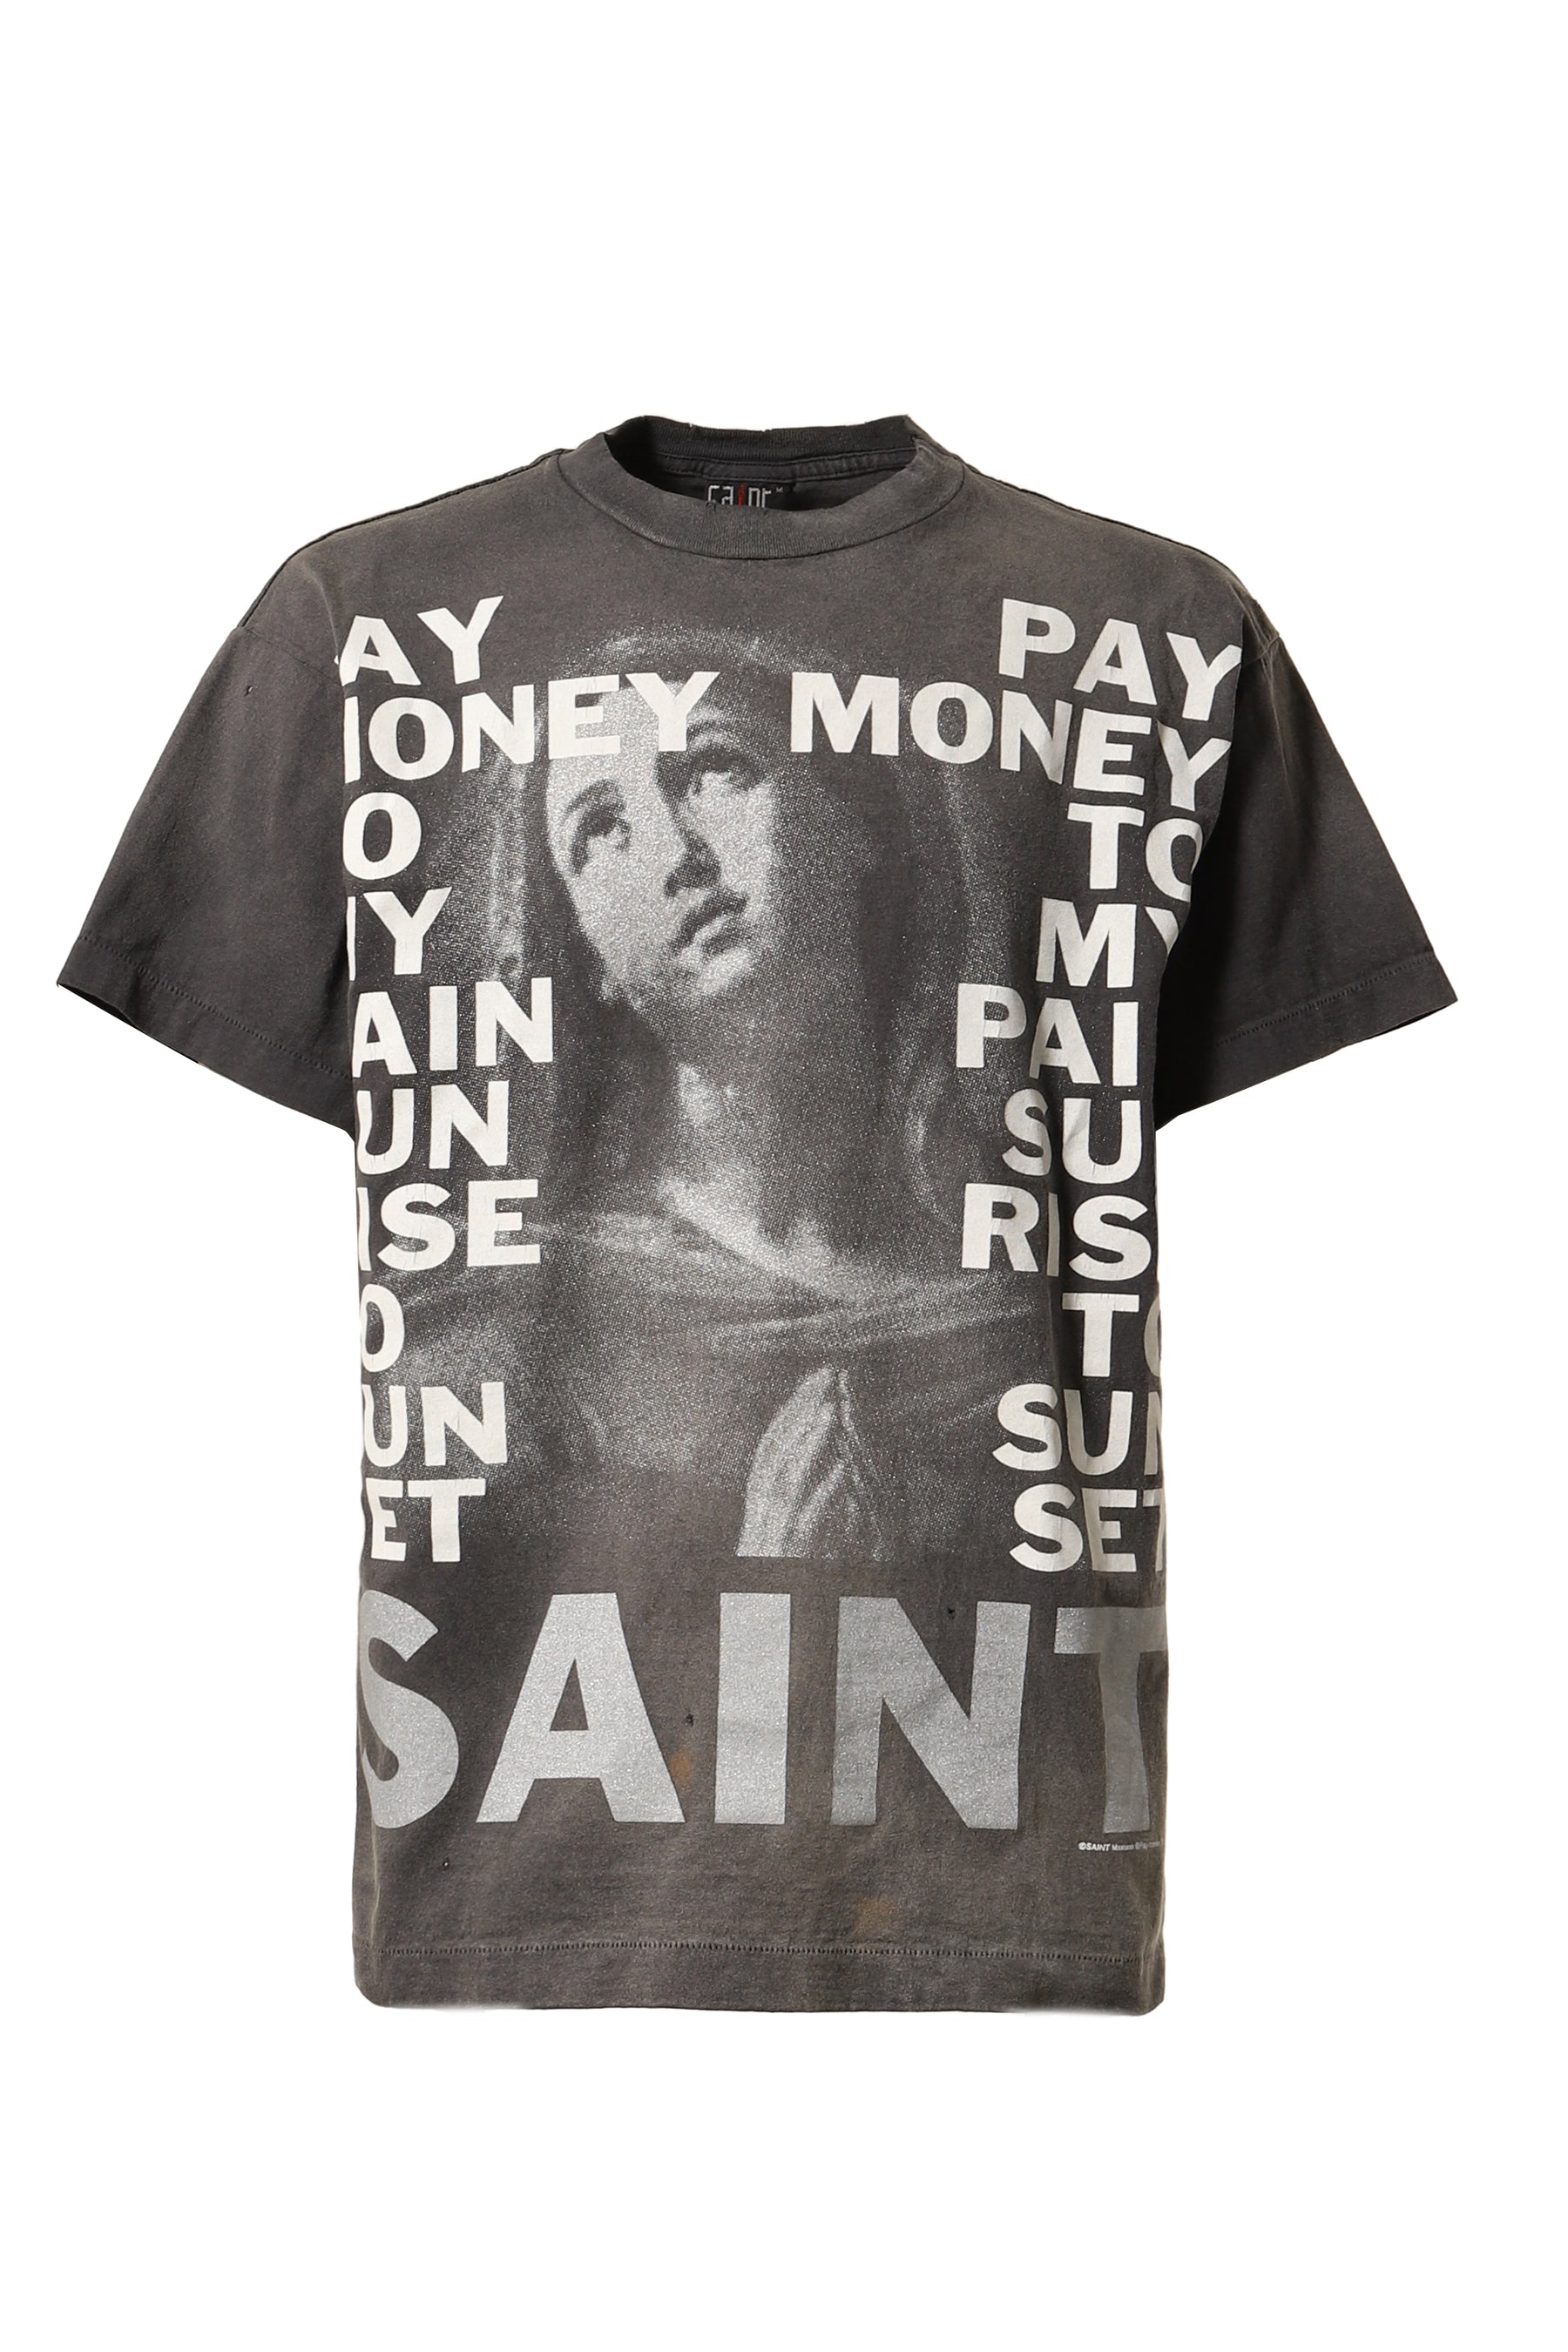 SAINT Mxxxxxx × Pay money To my Pain SS24 PTP_SS TEE/STAY REAL 